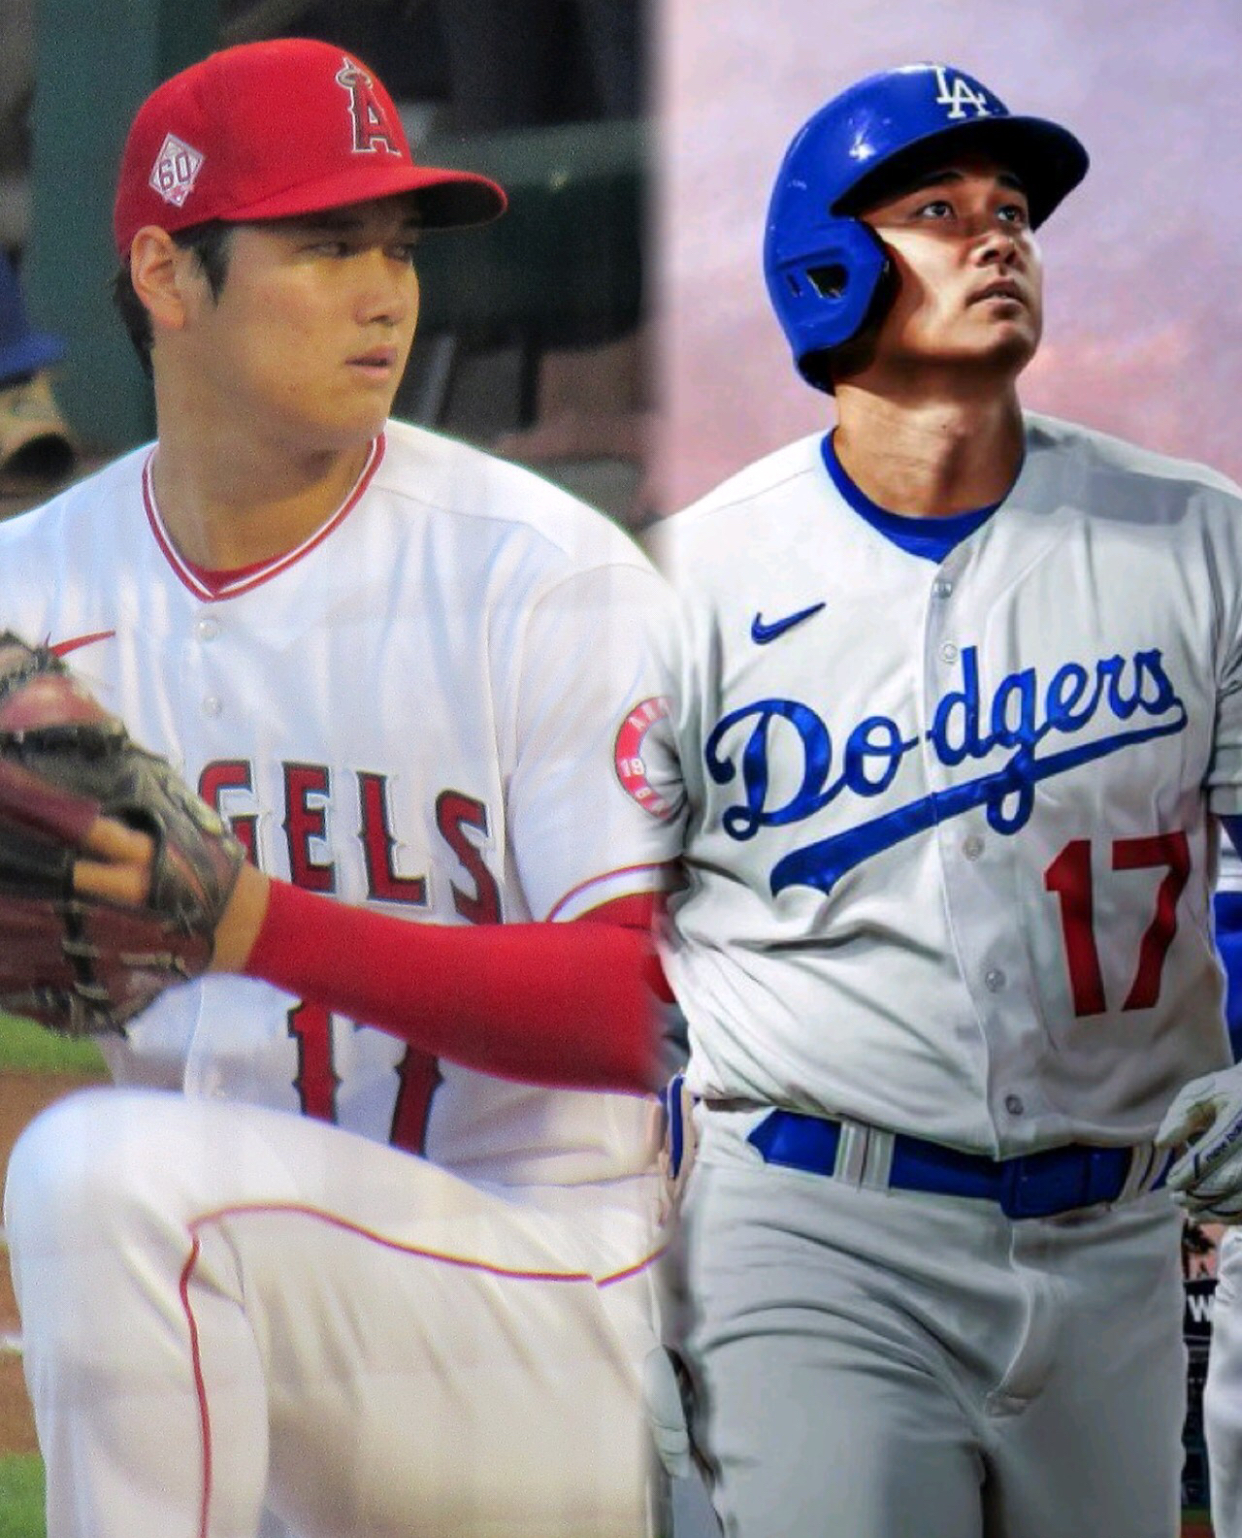 Shohei Ohtani Deferred Contract with the Dodgers